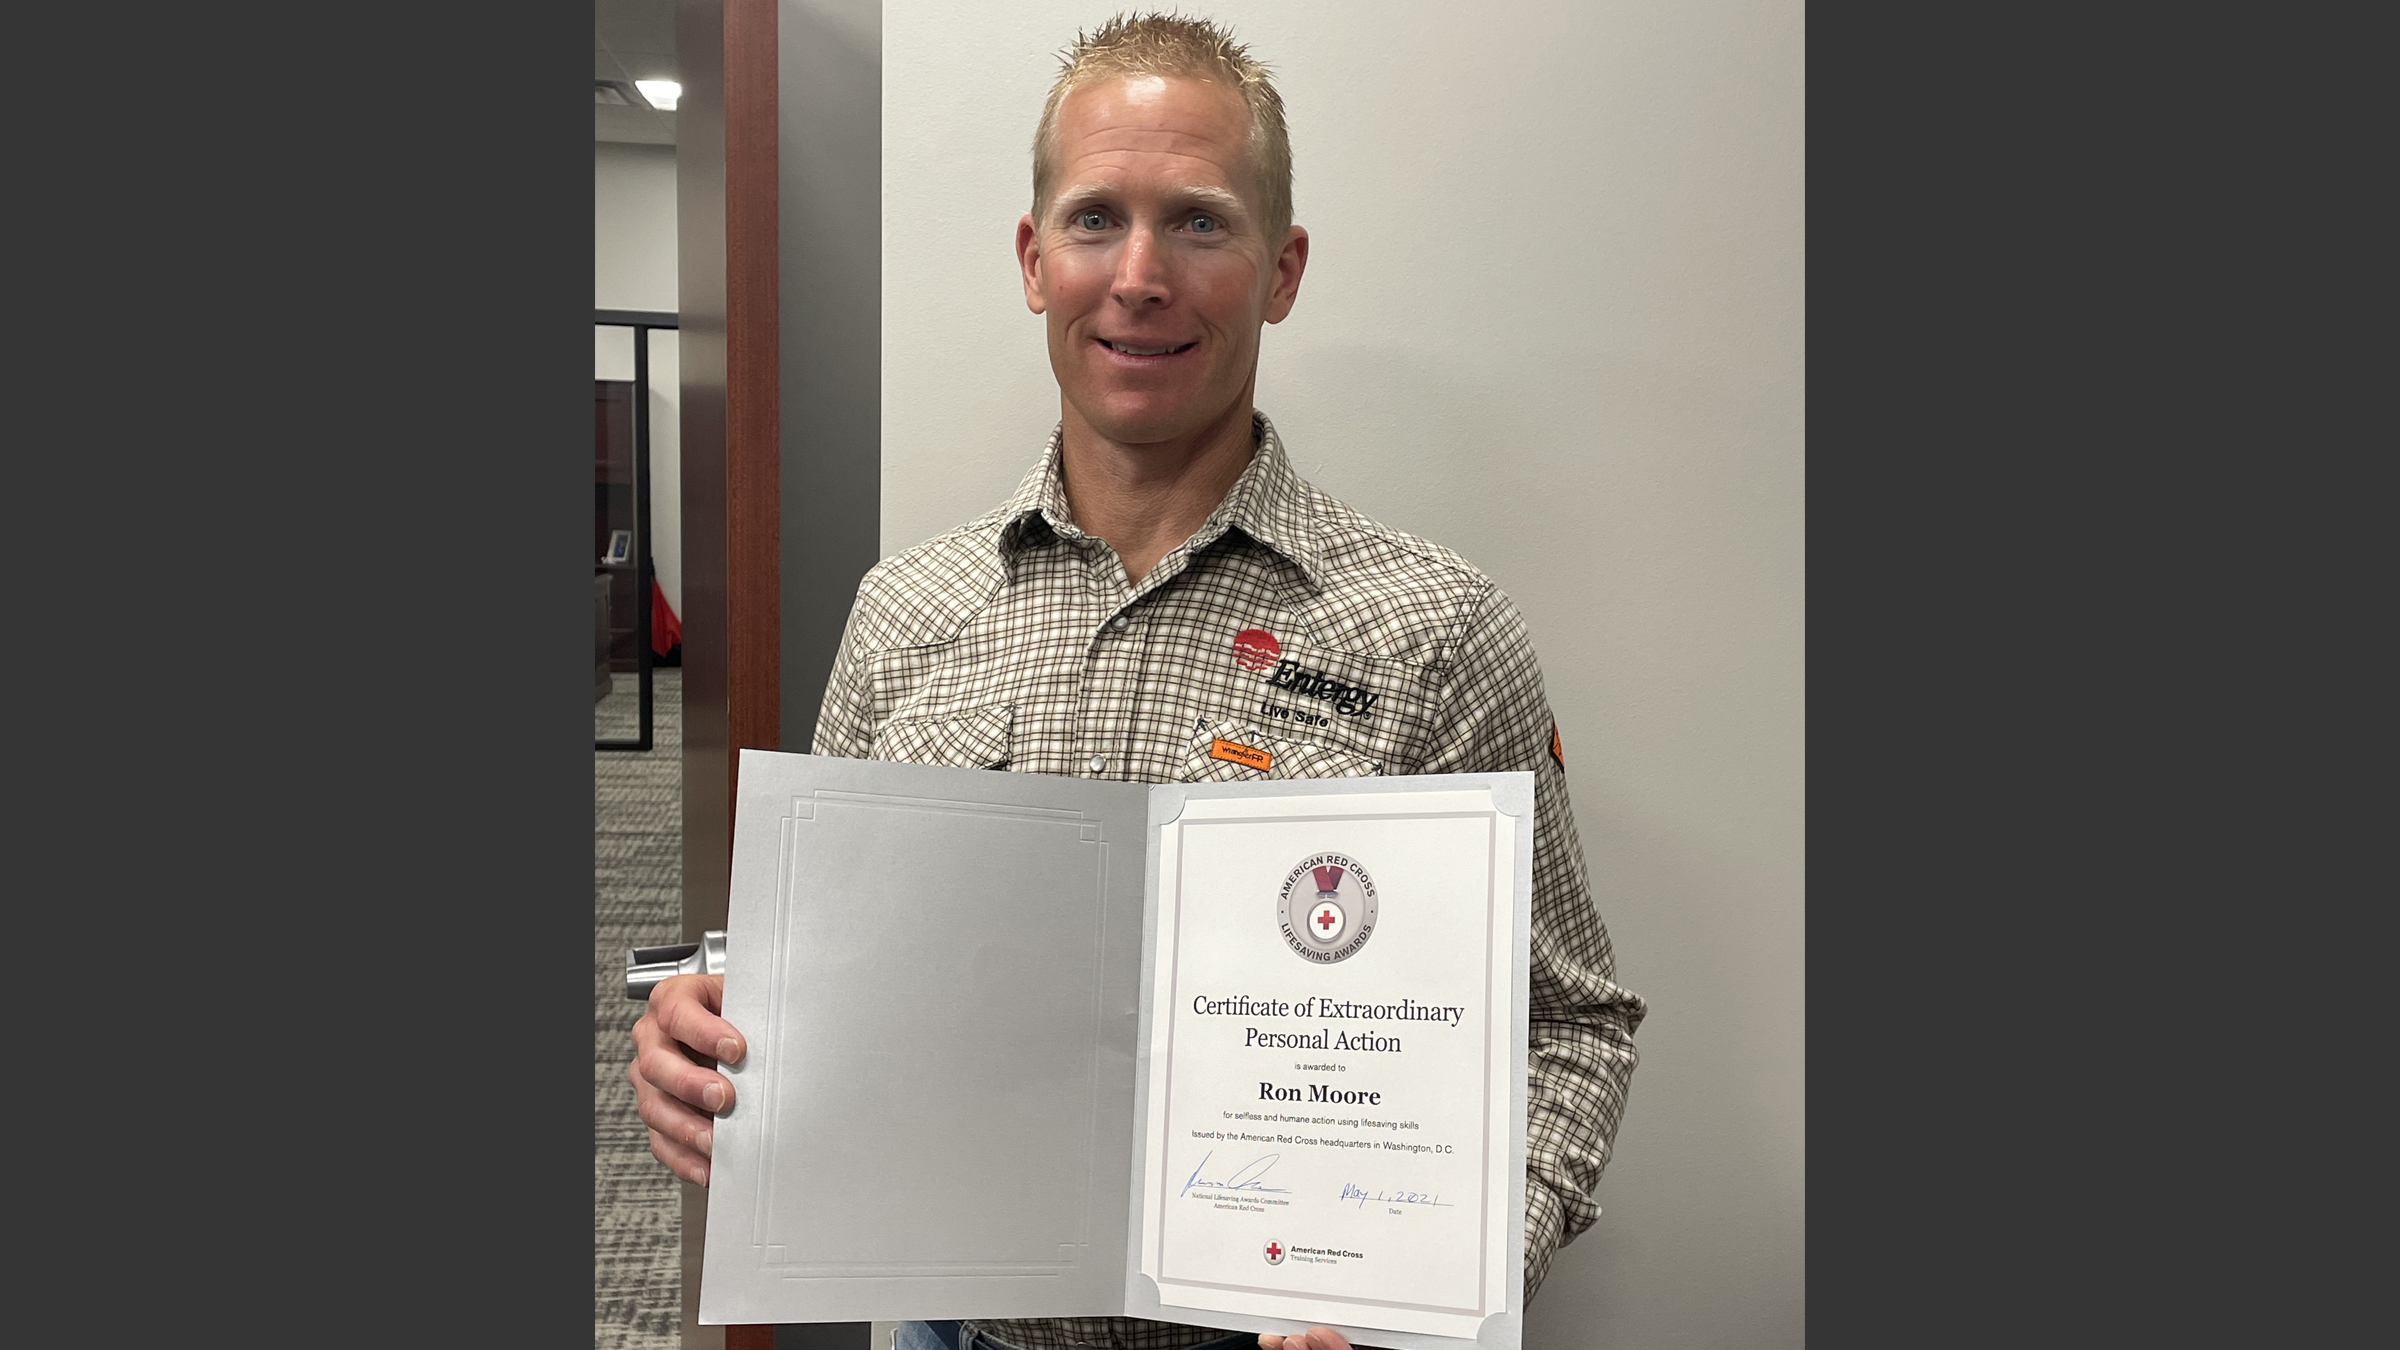 Ron Moore, Entergy Louisiana safety specialist, is pictured holding a lifesaving award from the American Red Cross.